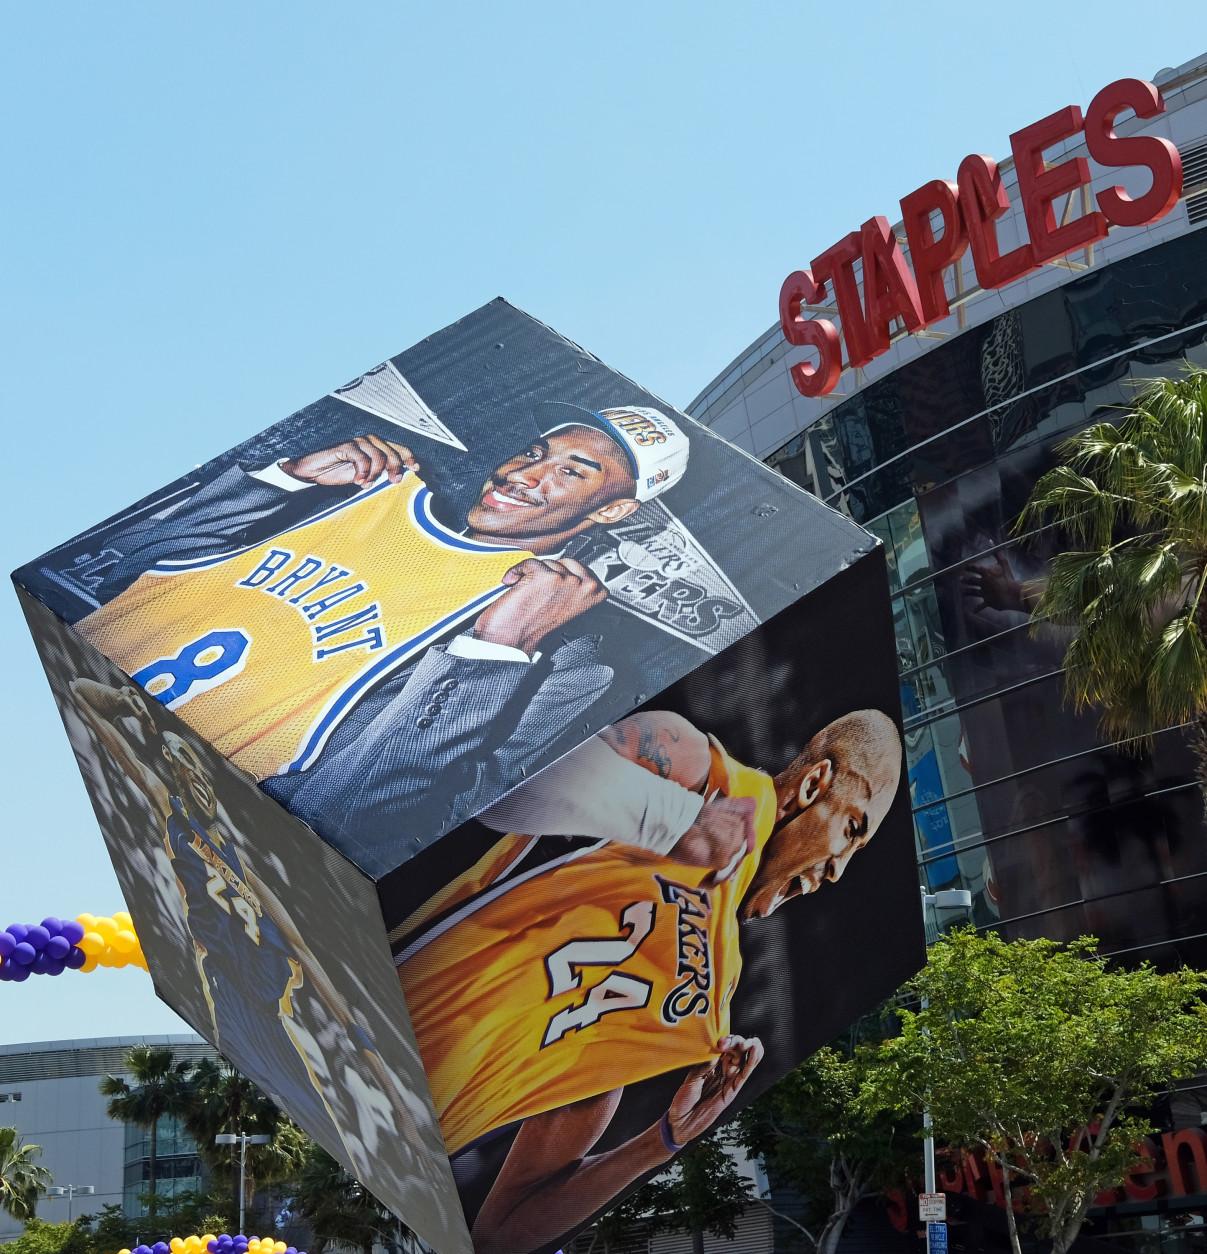 Giant displays commemorating Kobe Bryant's career have been added outside Staples Center before his last NBA basketball game, a contest against the Utah Jazz, in downtown Los Angeles Wednesday, April 13, 2016.  Many of Bryant's fans - even some of the adults - have never known Los Angeles without him. I's a feeling they're about to have to get used to as fans celebrate his final night as a Laker. (AP Photo/Richard Vogel)